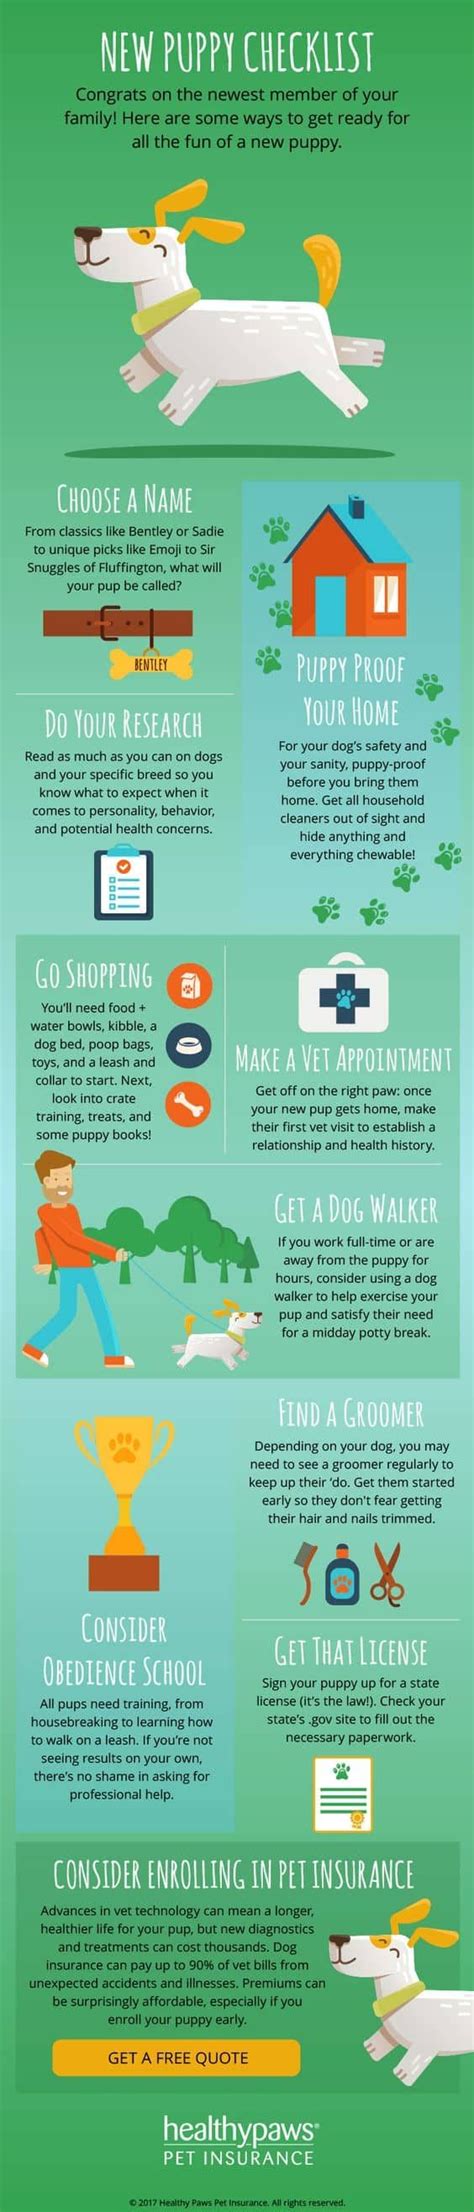 New Puppy Checklist Dog Hacks To Save Your Sanity Puppy Training